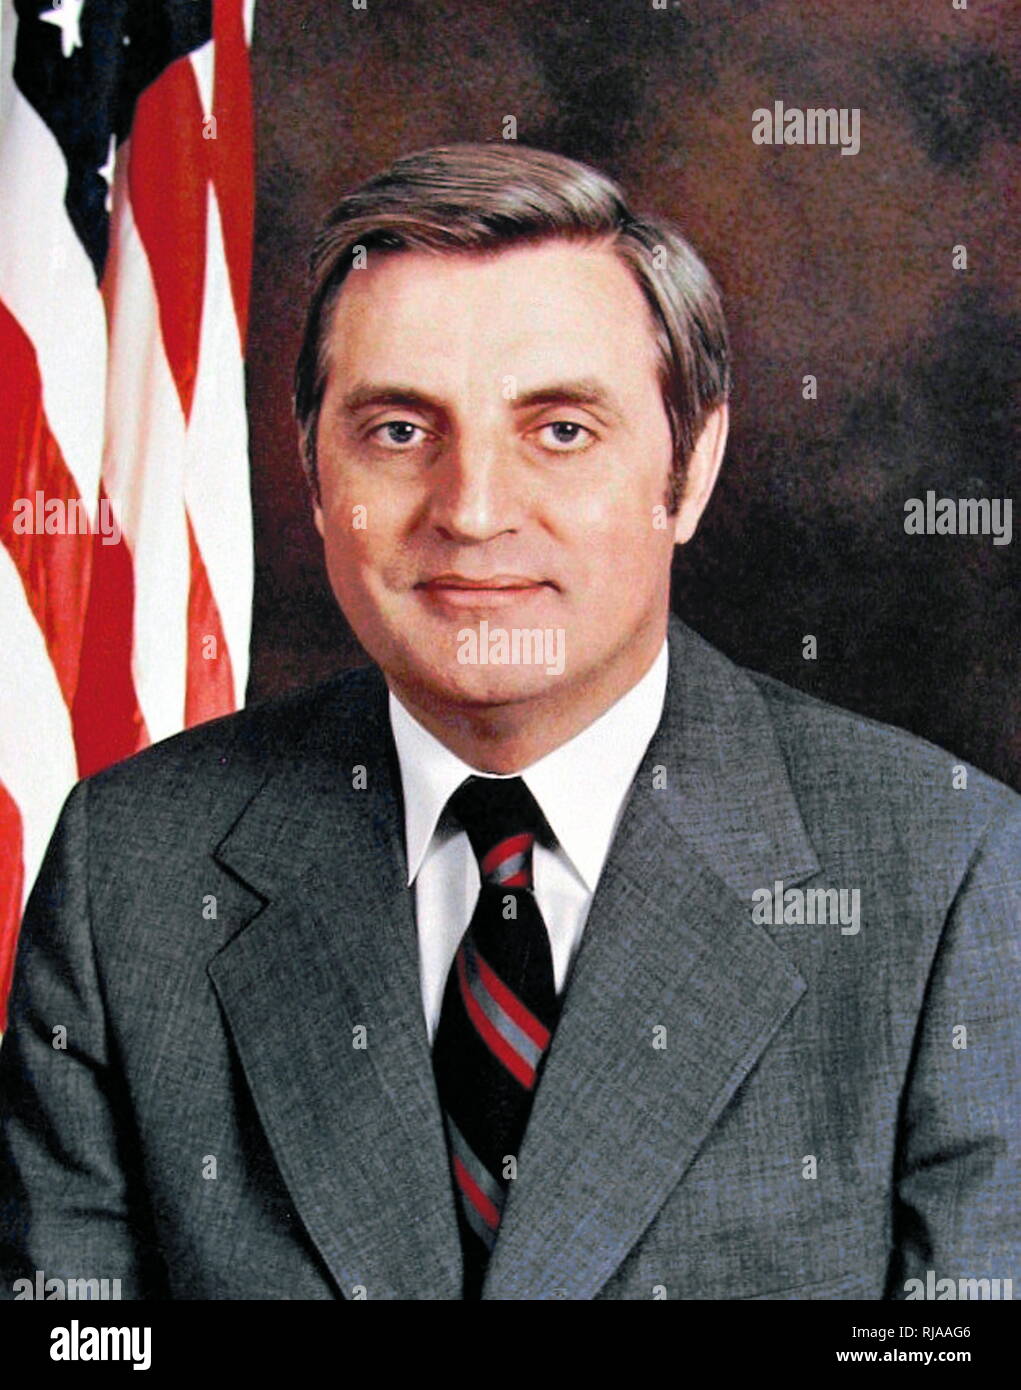 Walter Frederick 'Fritz' Mondale (born January 5, 1928) is an American politician, diplomat and lawyer who served as the 42nd Vice President of the United States from 1977 to 1981, and as a United States Senator from Minnesota (1964–76). He was the Democratic Party's presidential nominee in the United States presidential election of 1984, but lost to Ronald Reagan in a landslide. Stock Photo